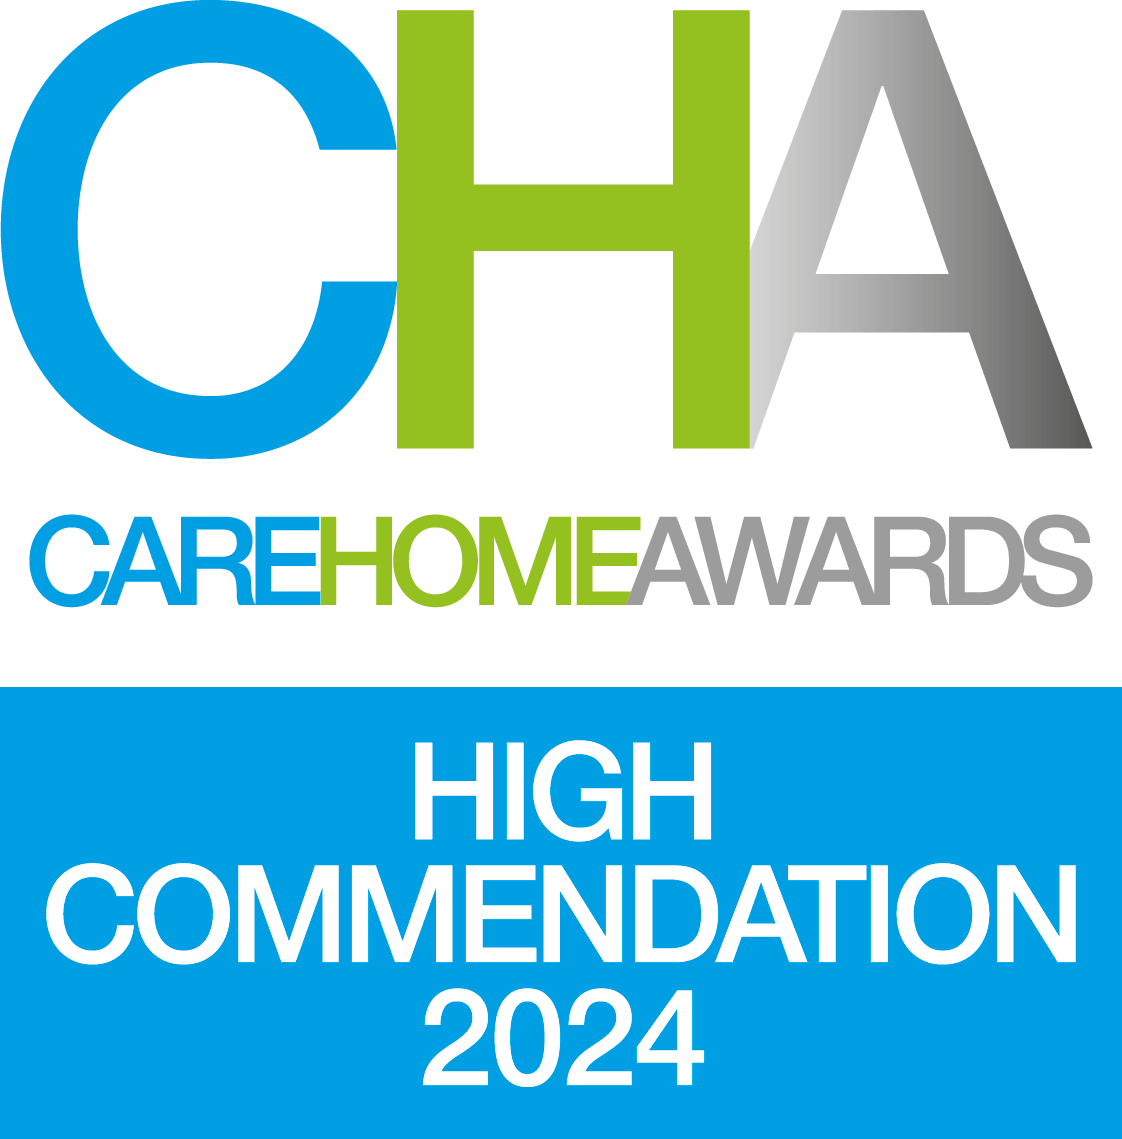 Care Home Awards 2024 high commendation - Best Care Home Marketing, Advertising or PR Activities